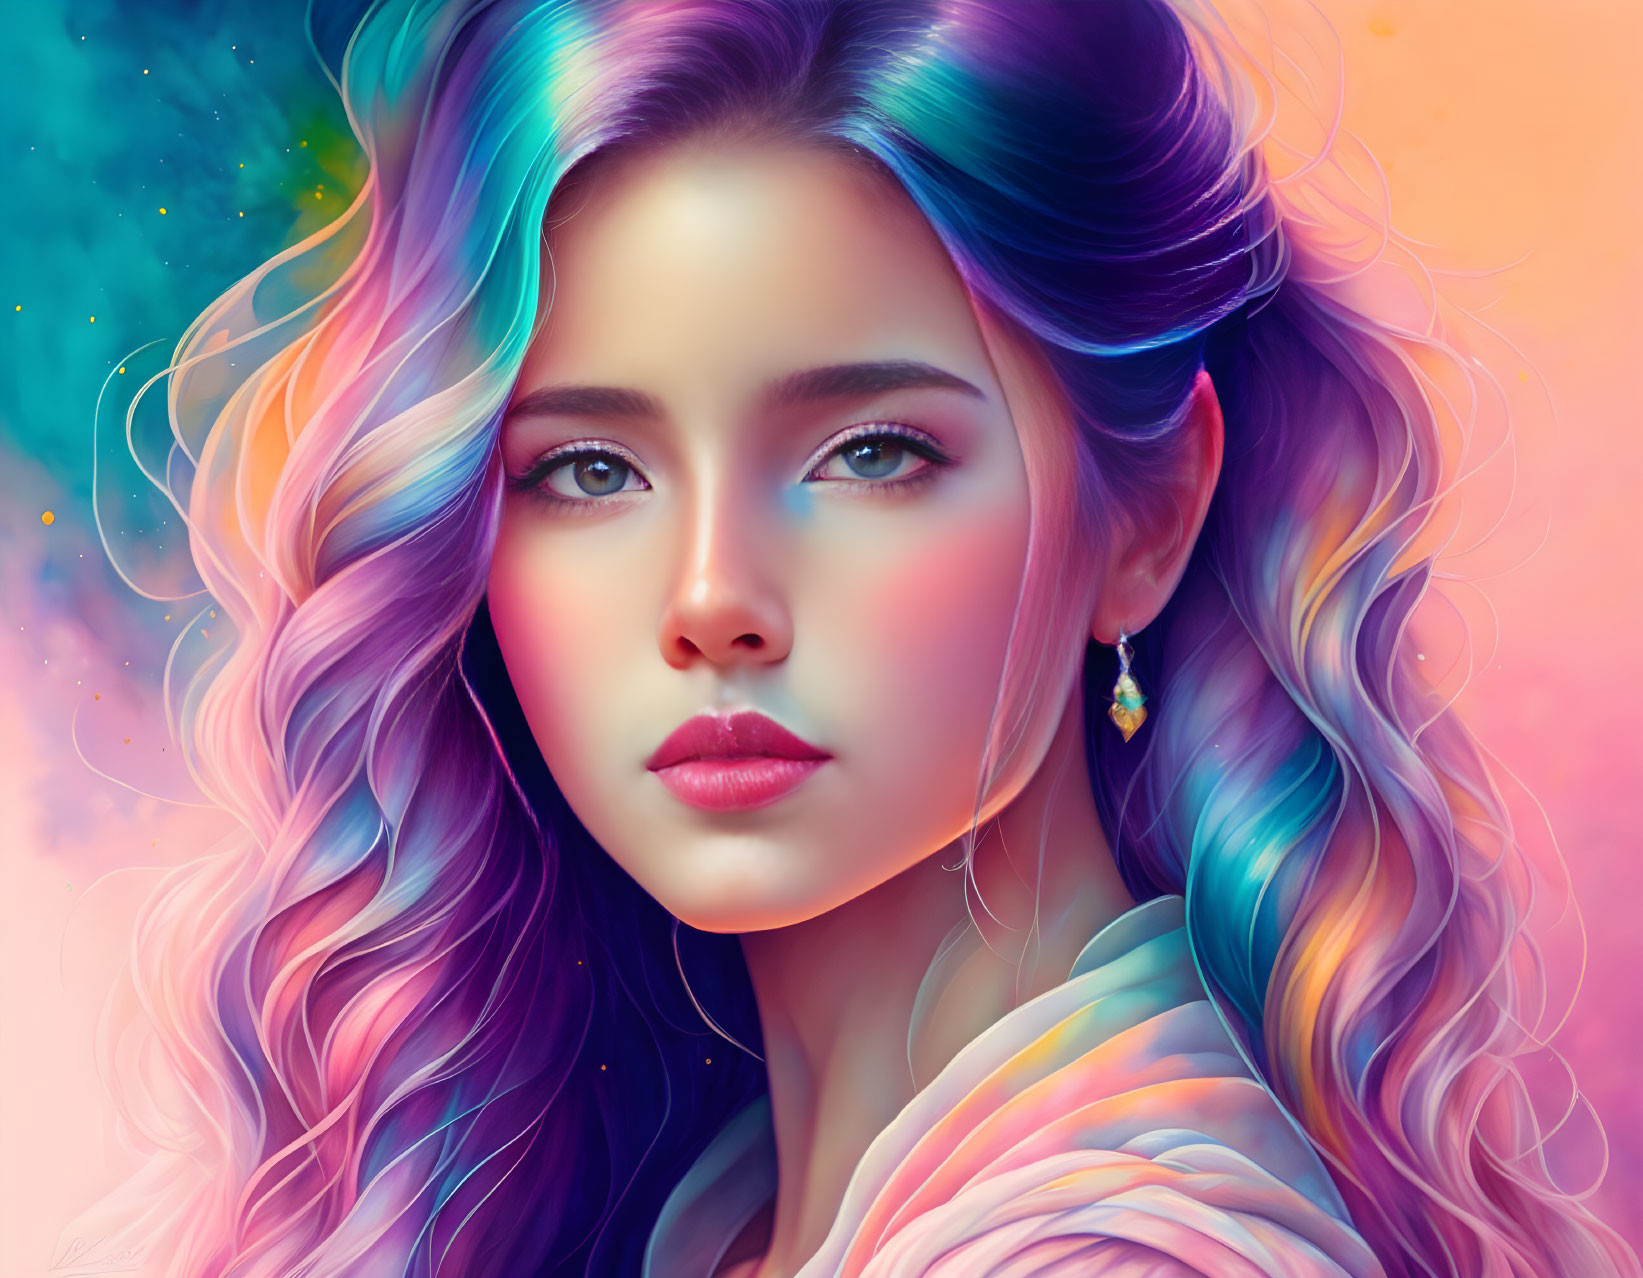 Multicolored hair digital artwork with vibrant background